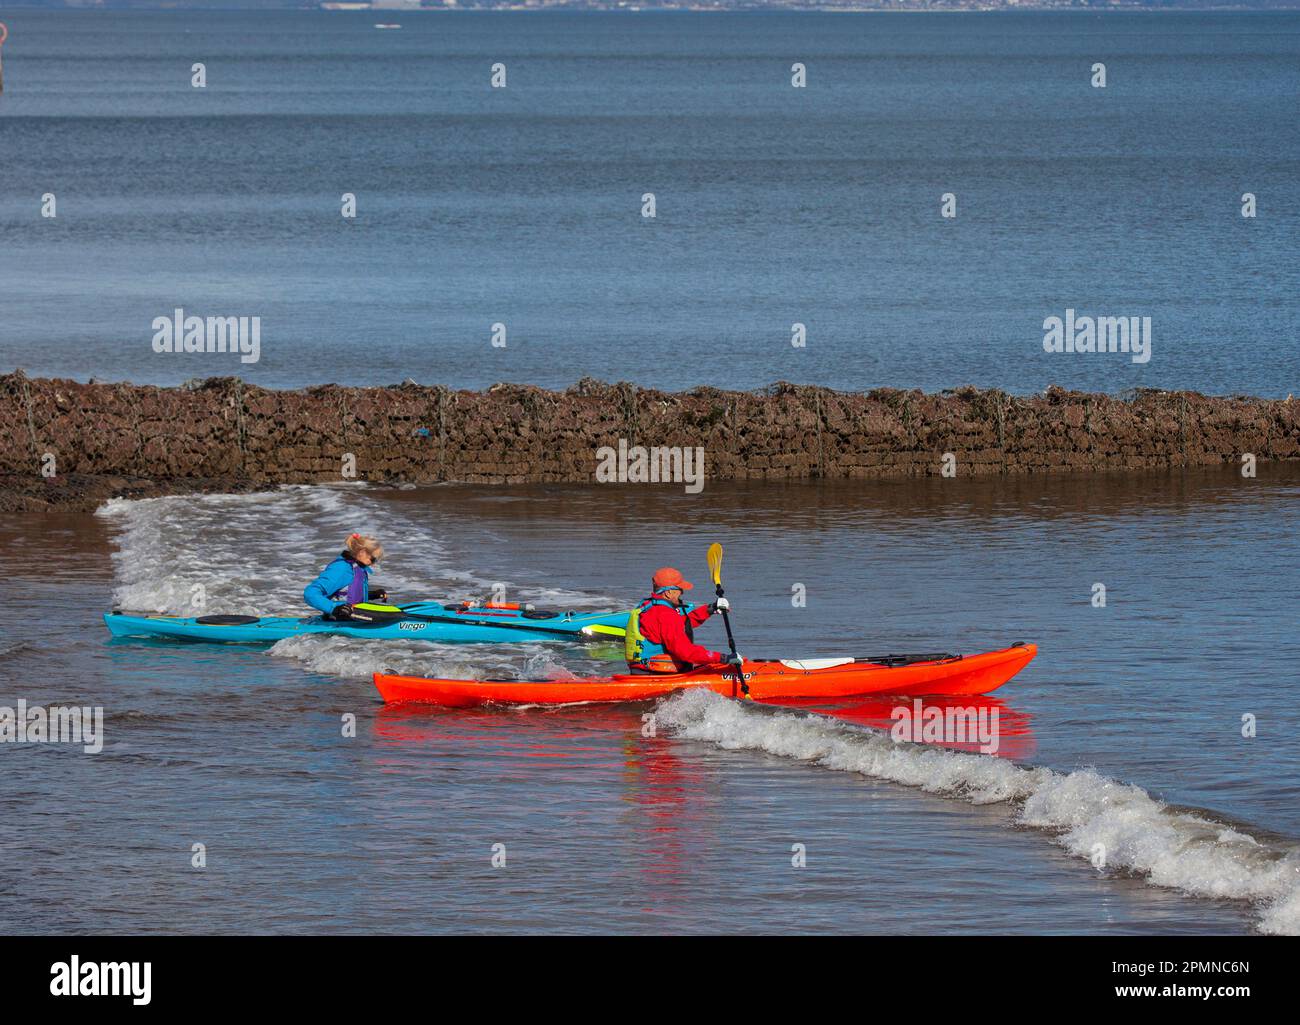 Portobello, Edinburgh, Scotland, UK. 14th April 2023. Morning exercise by the Firth of Forth. Pictured: Kayaking on the Firth of Forth, , temperature 10 degrees centigrade. Credit: Scottishcreative/alamy live news. Stock Photo